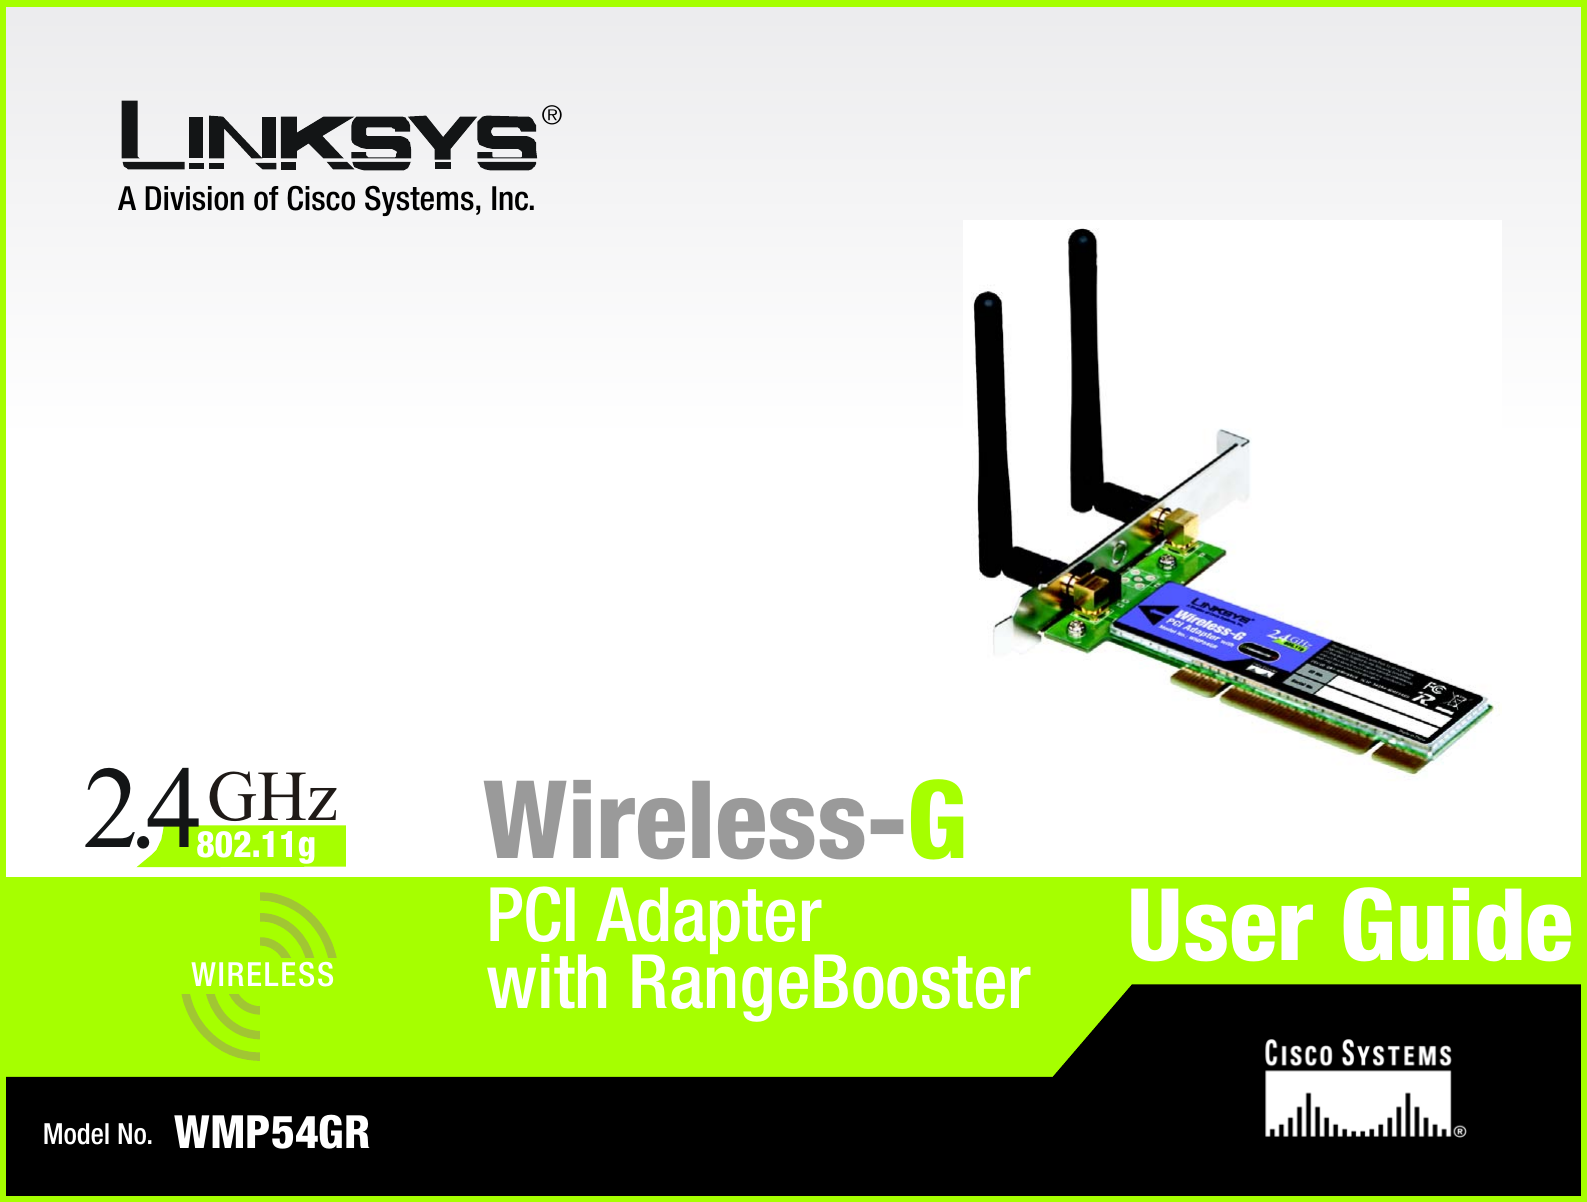 A Division of Cisco Systems, Inc.®Model No.PCI Adapter Wireless-GWMP54GRUser GuideWIRELESSGHz2.4802.11gwith RangeBooster